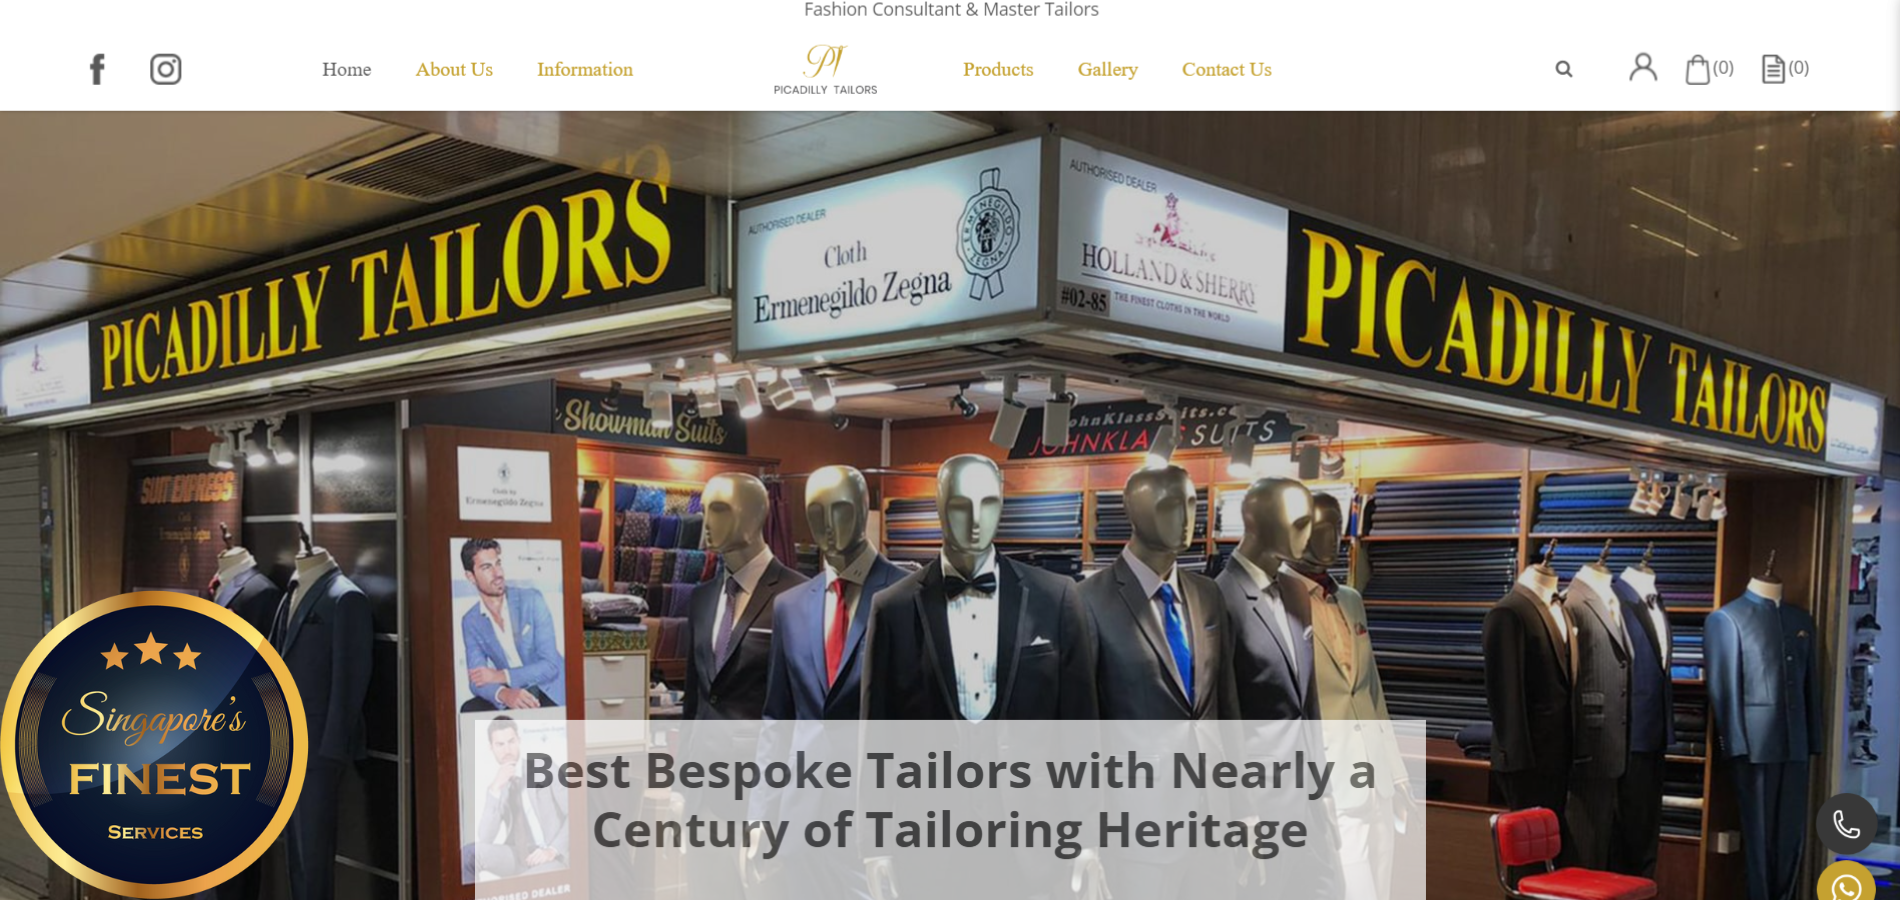 The Finest Tailors in Singapore